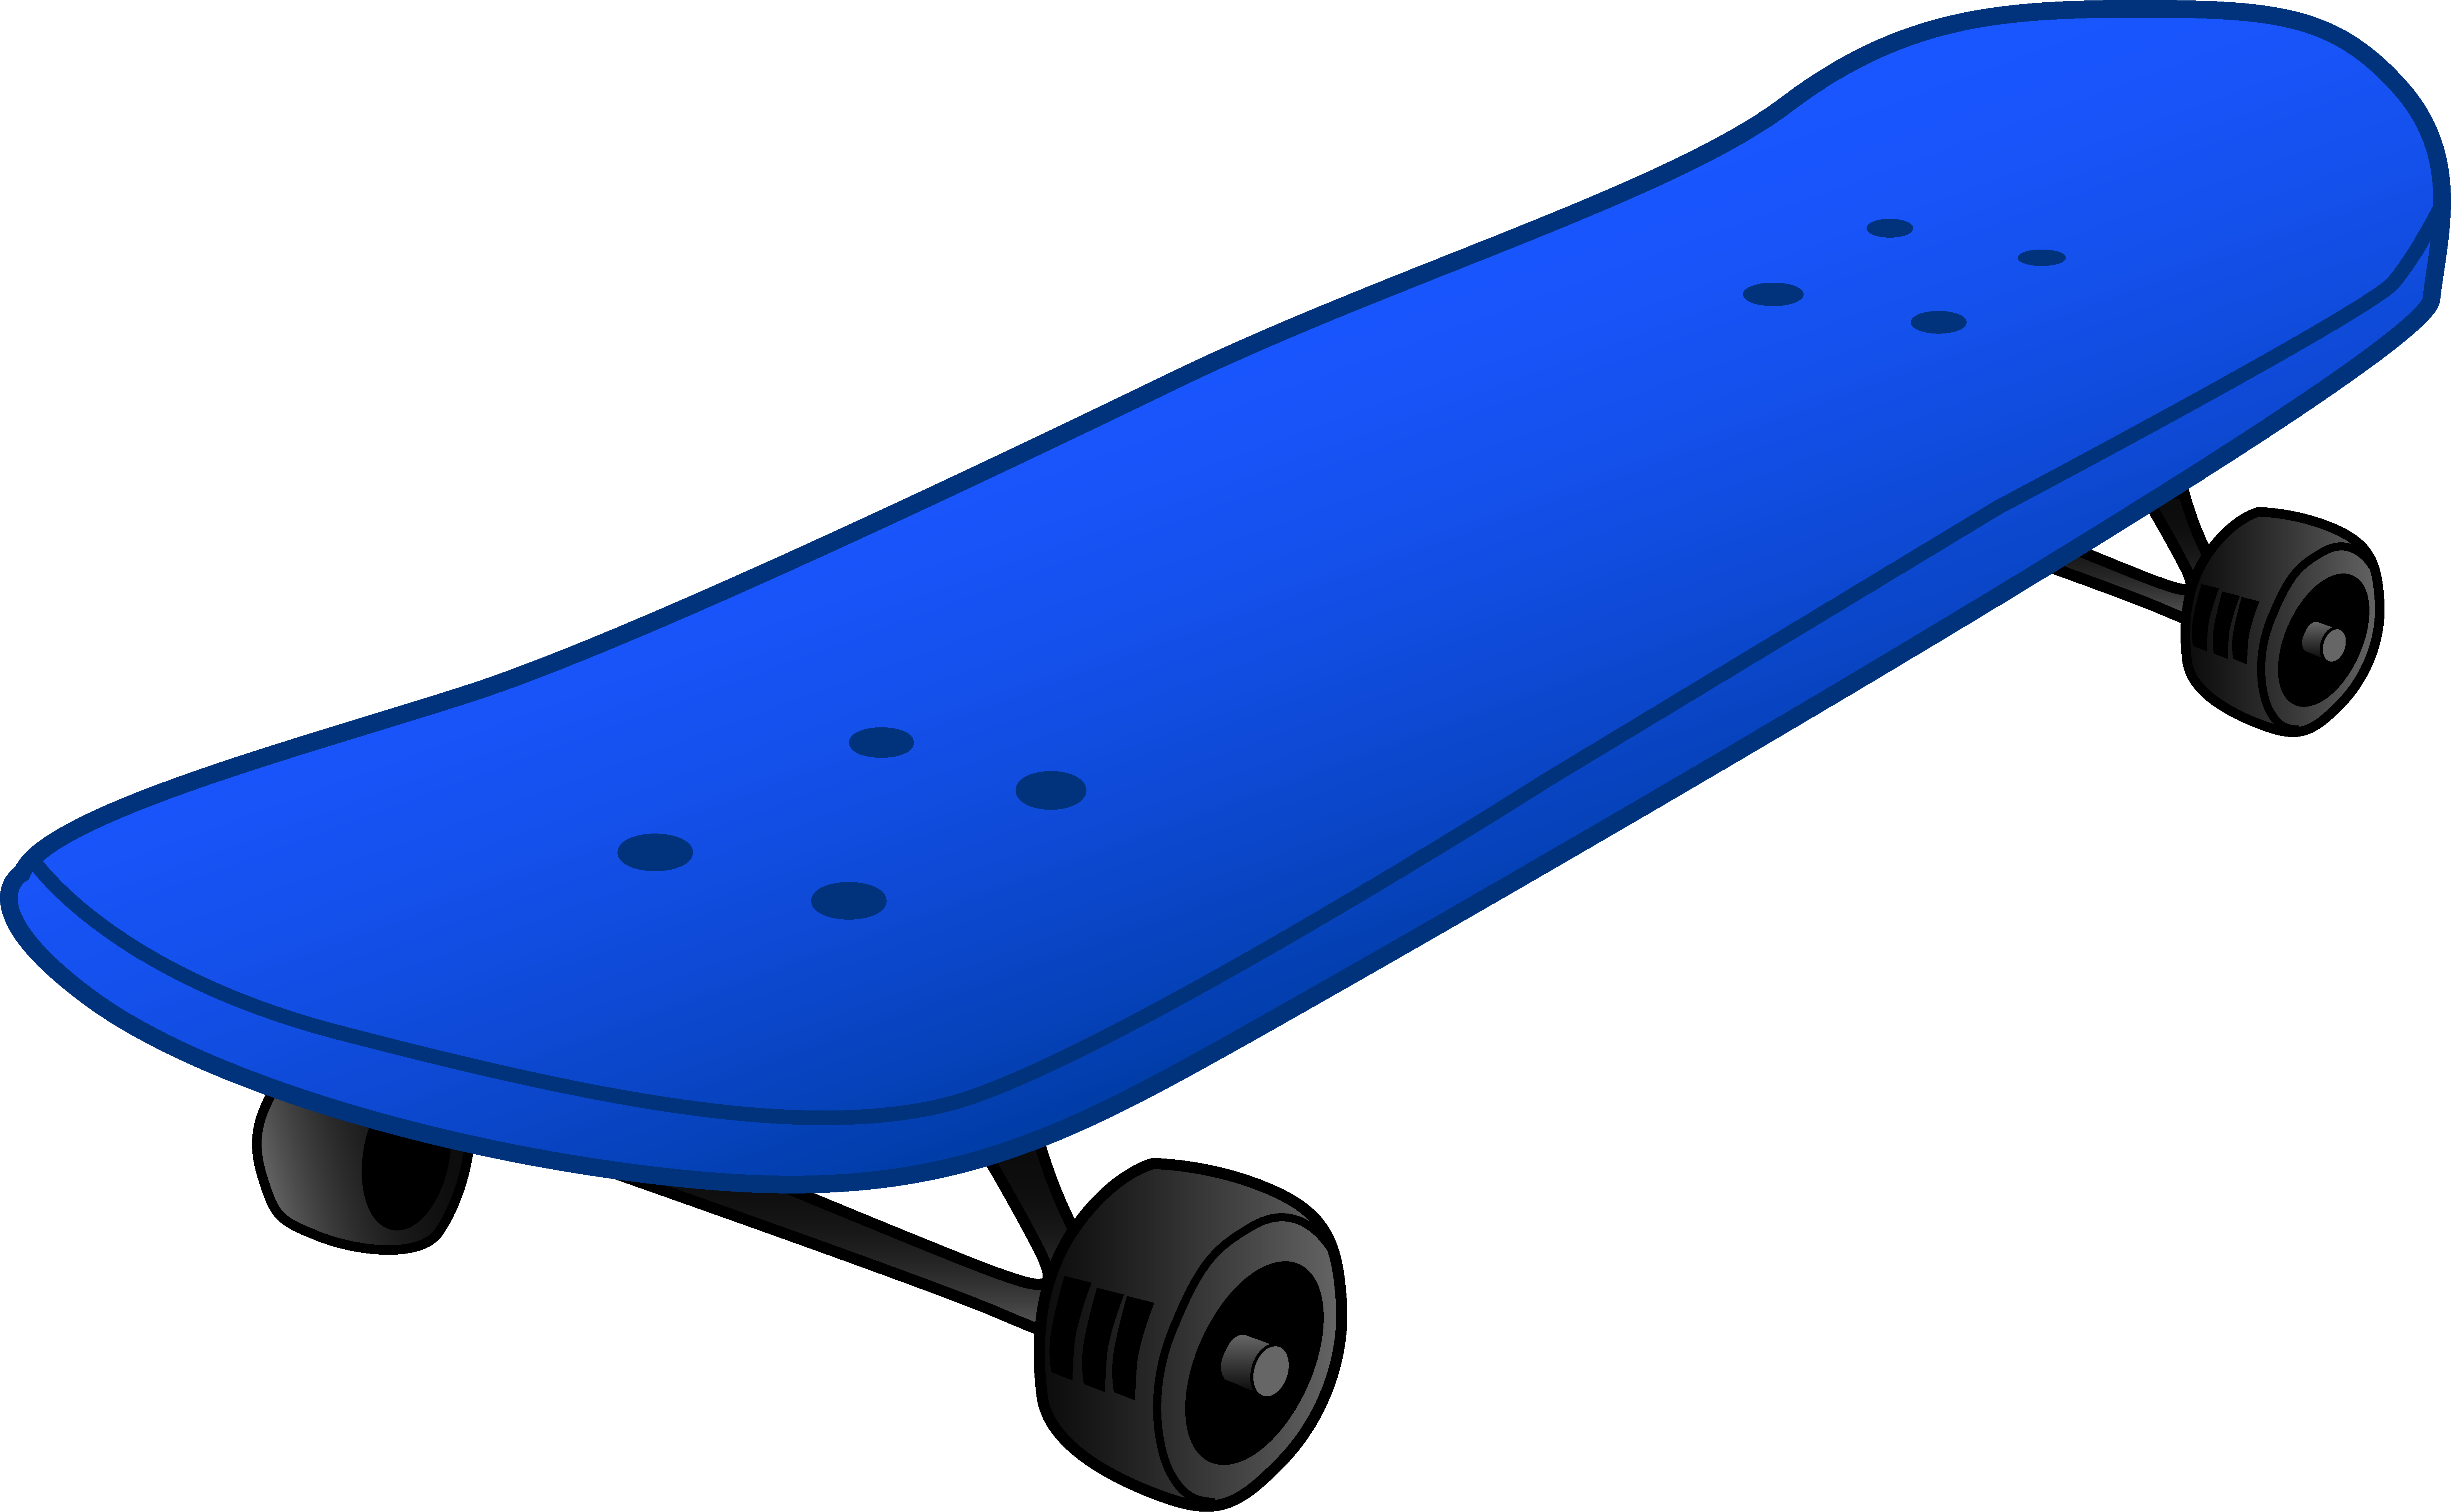 Skateboard Clipart | Clipart Panda - Free Clipart Images